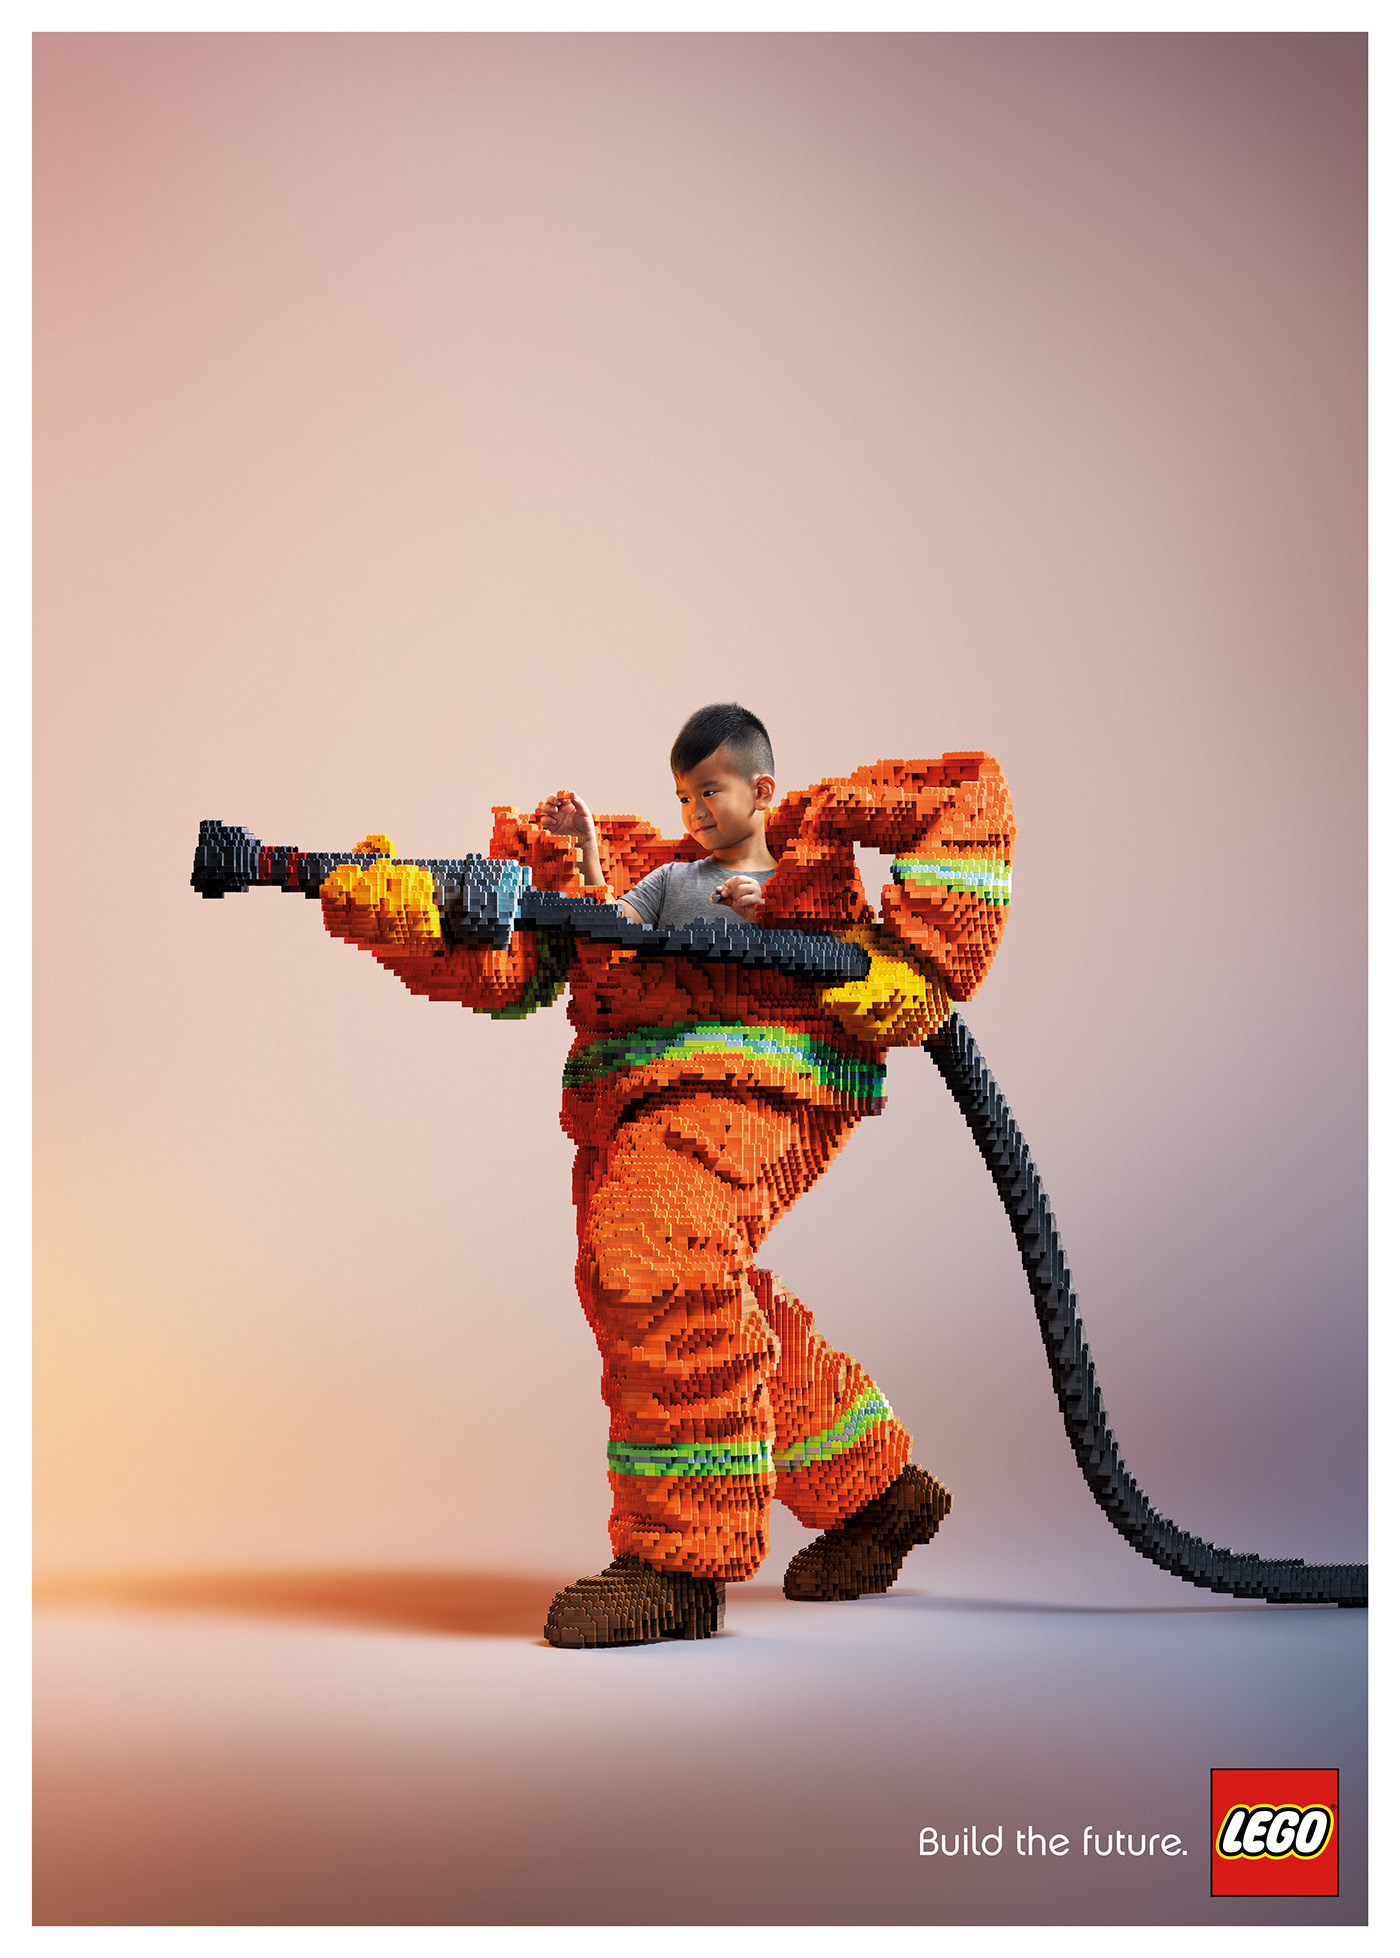 Lego: Build the future - Firefighter